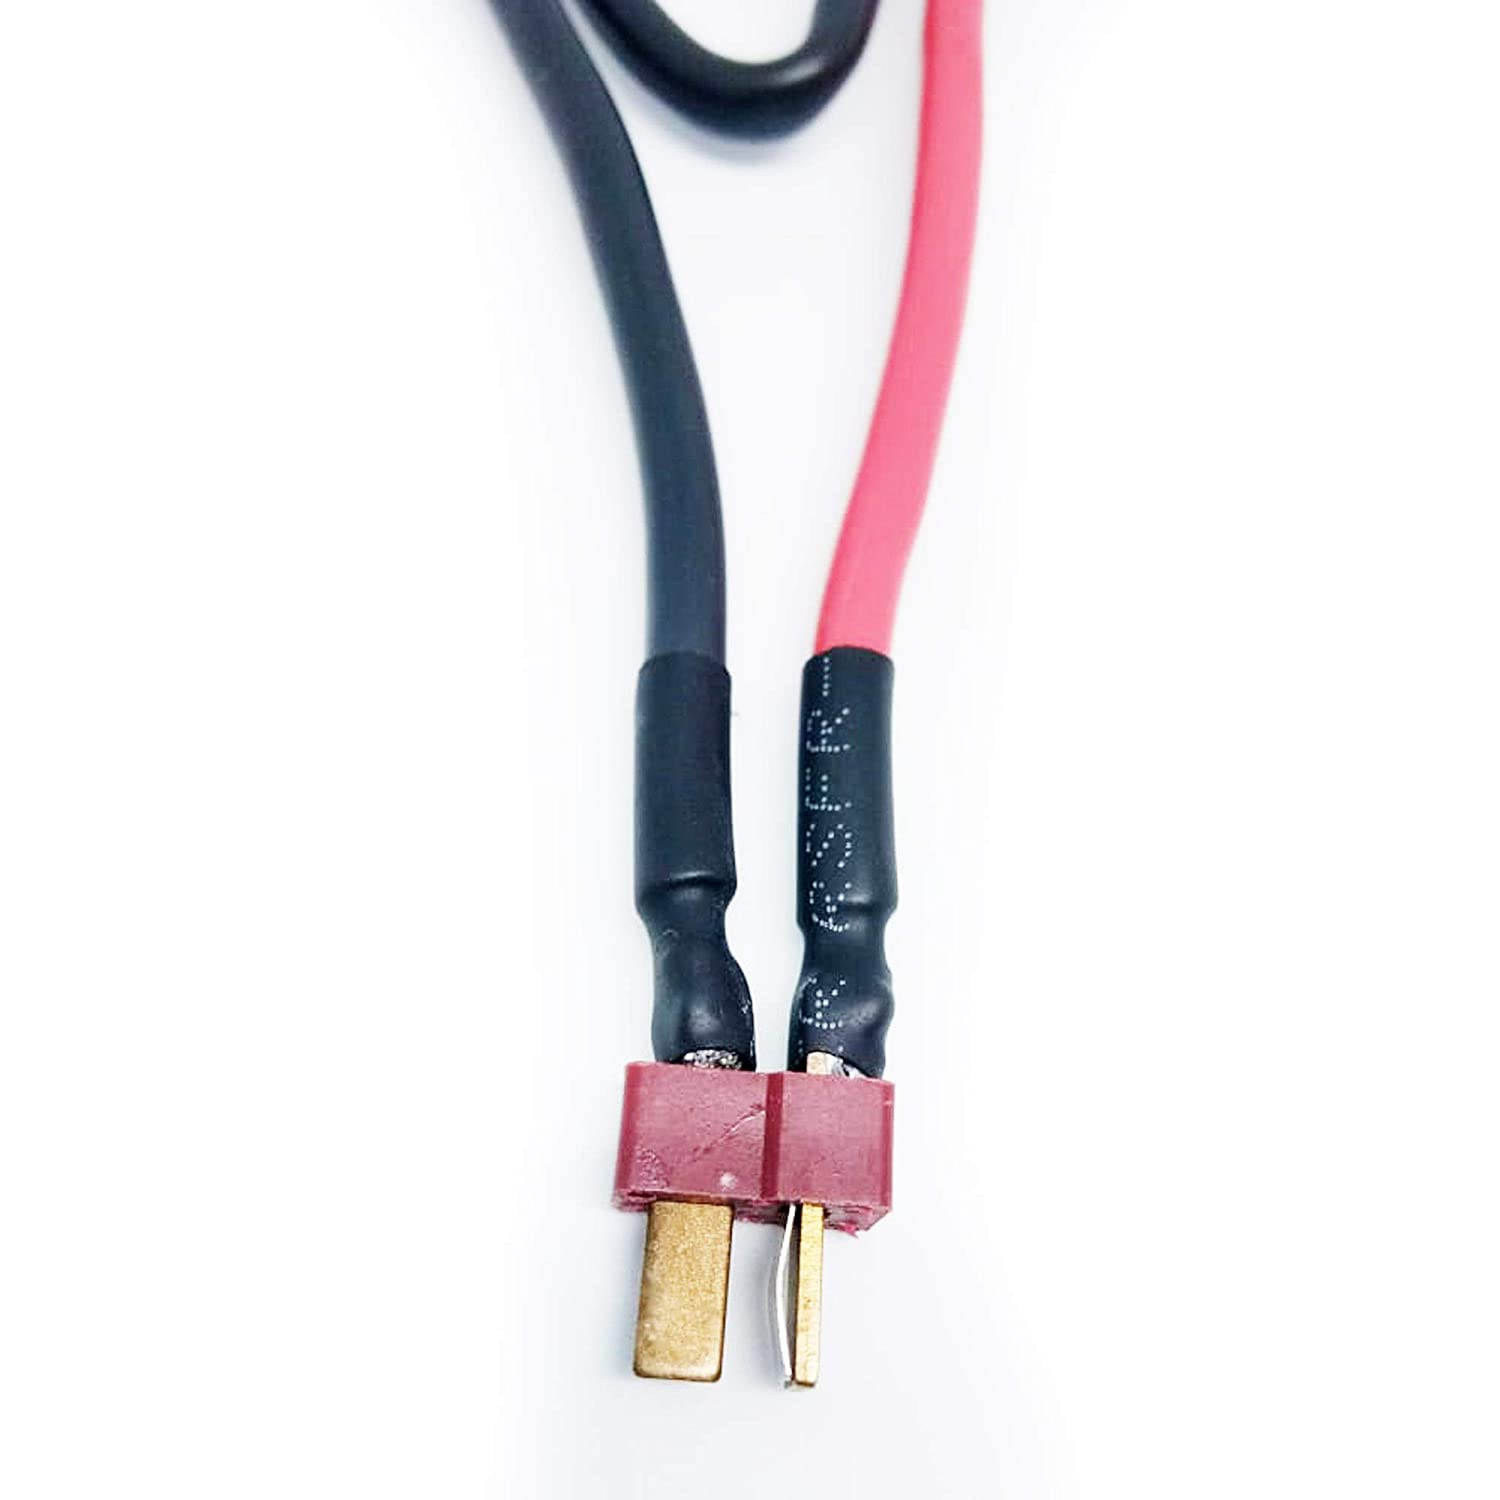 T PLUG MALE TO FEMALE SERIES Y Splitter (1 T PLUG MALE TO 2 T PLUG FEMALE ) |Battery Connector Cable Silicon Wire